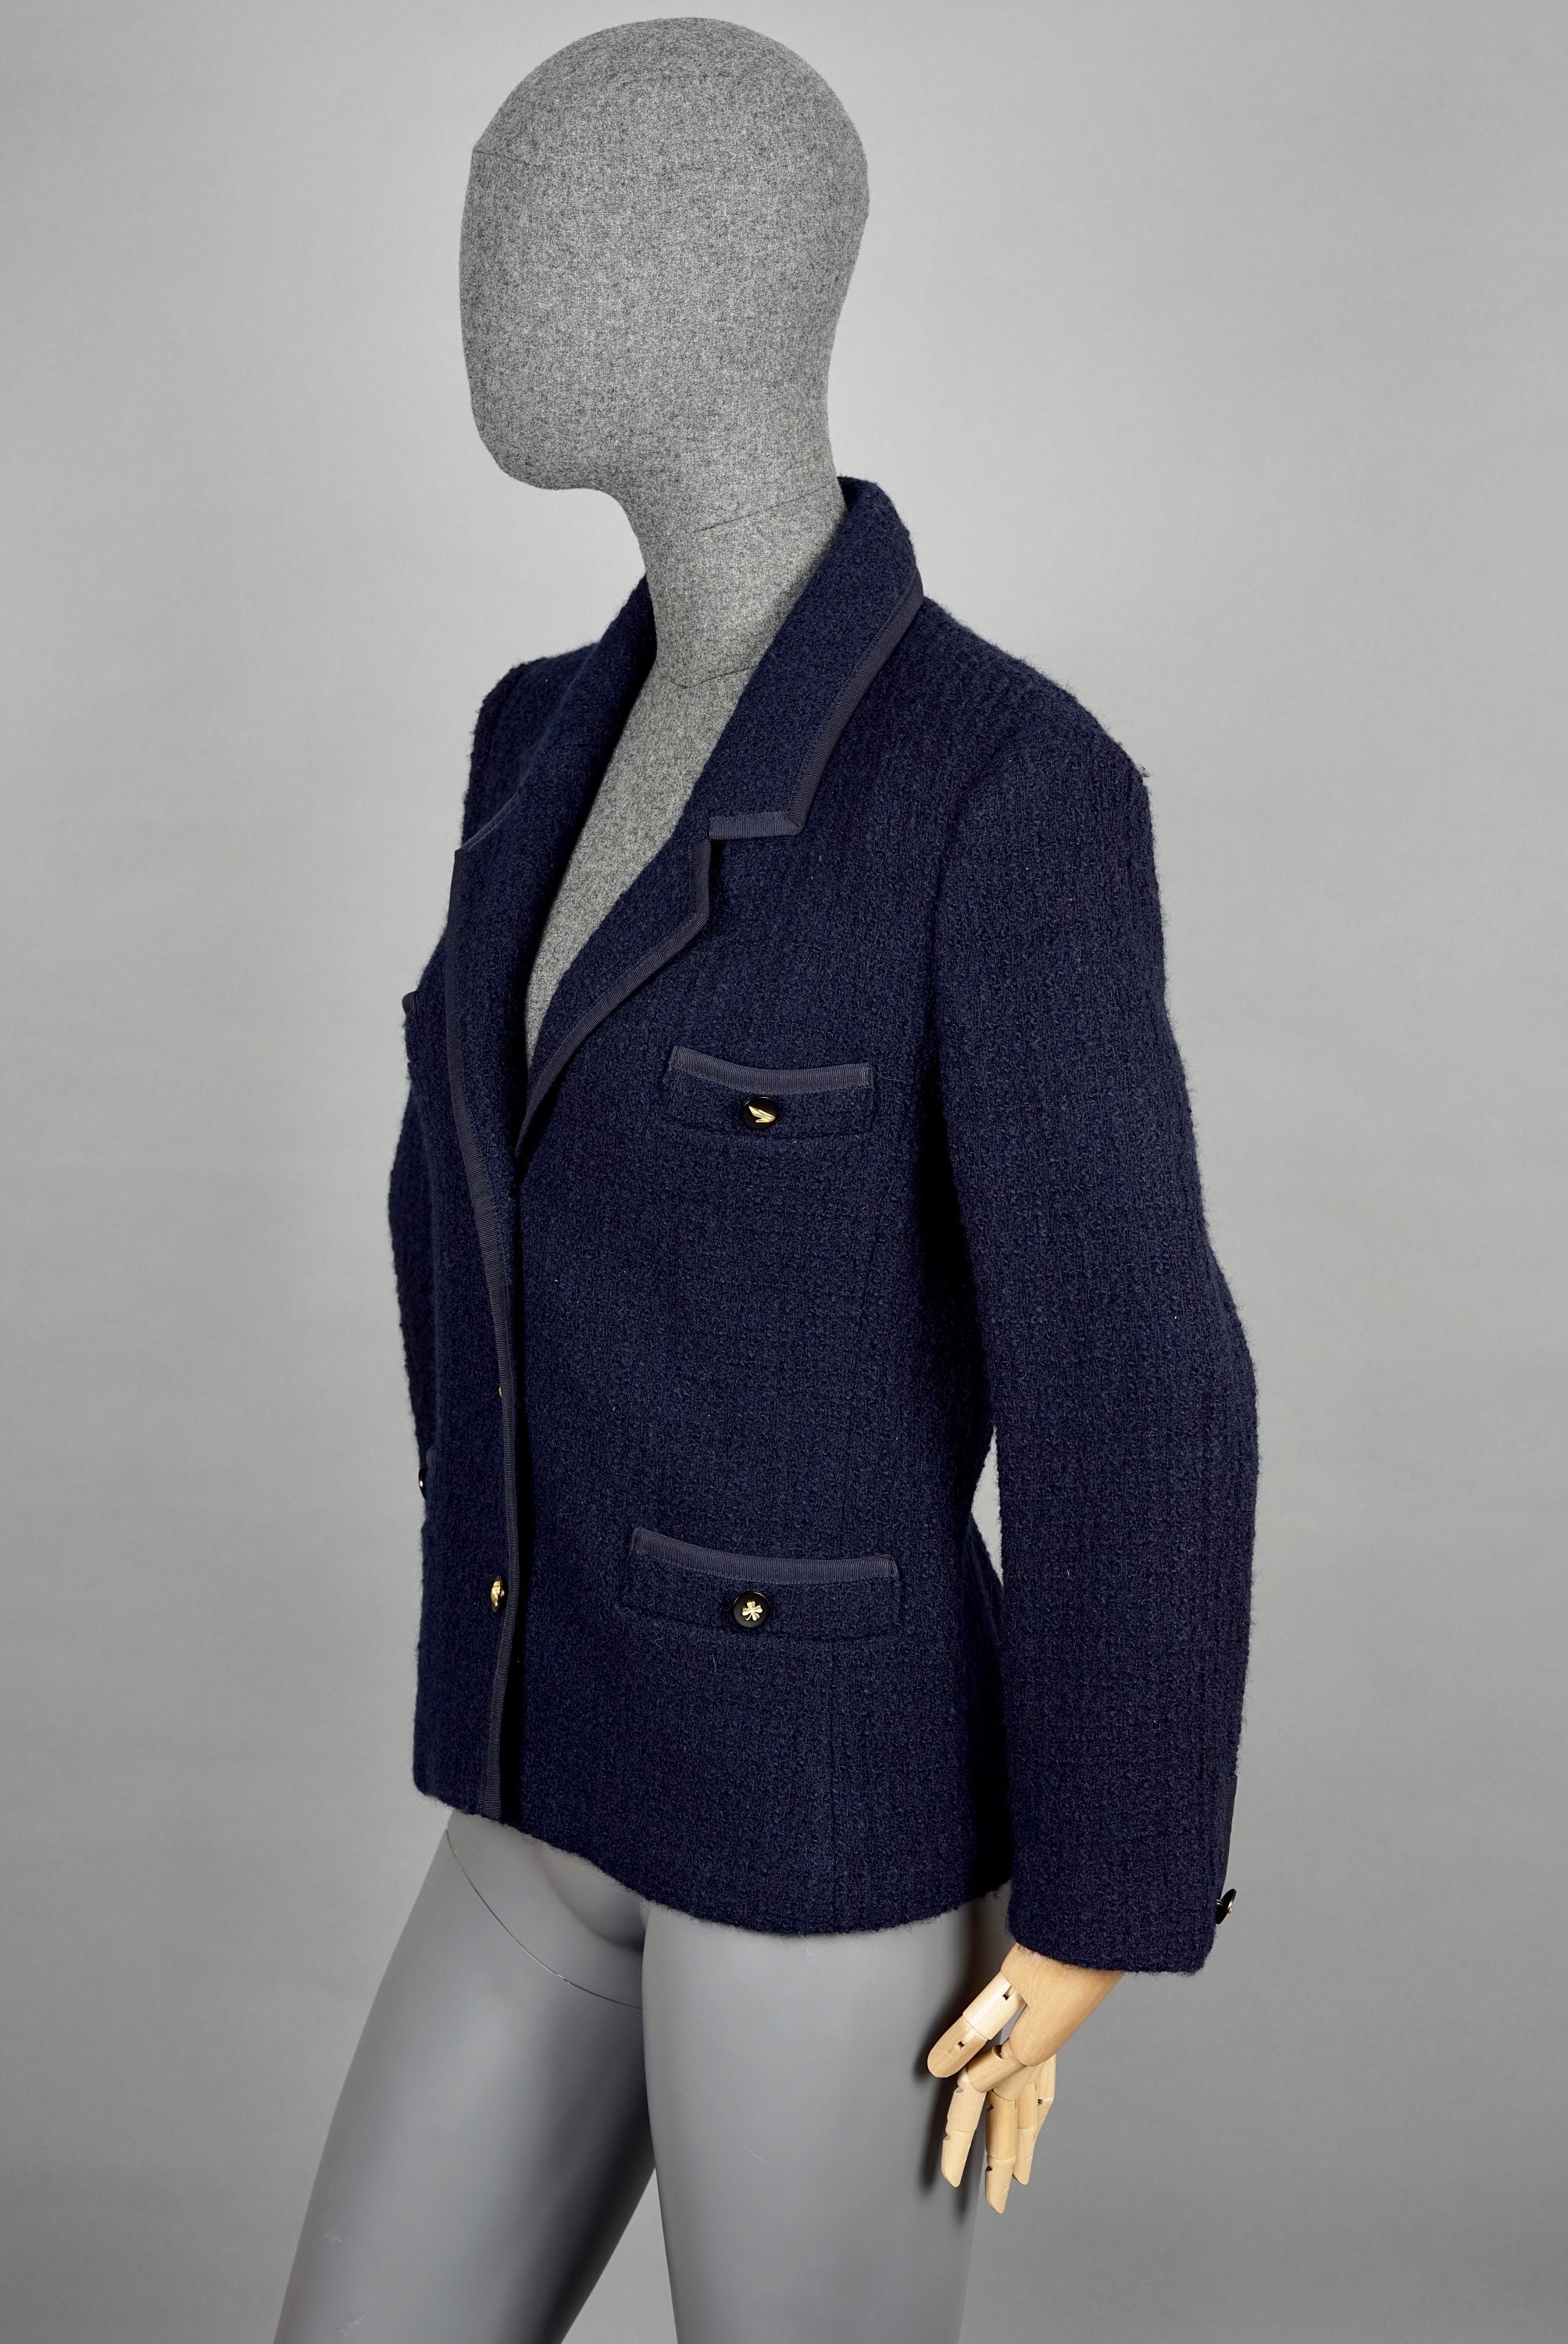 Chanel - Authenticated Jacket - Tweed Blue Plain for Women, Very Good Condition